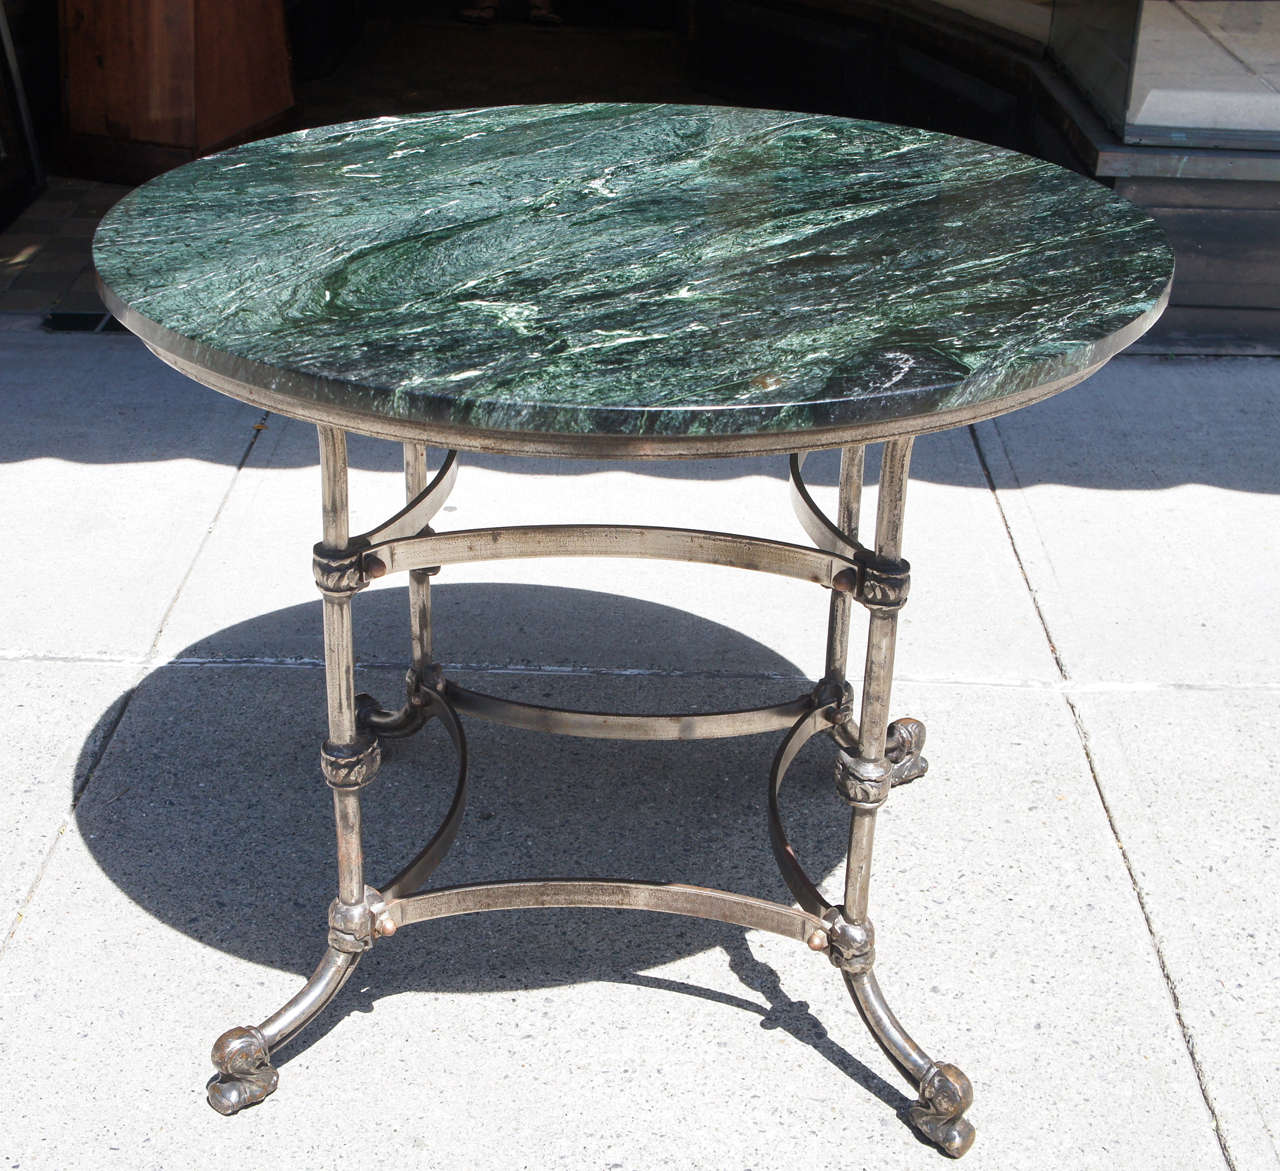 This late 19th century table could be used as a breakfast , center or large occasional table. Made in an industrial way the steel is hand wrought and held together with large exposed brass nuts and bolts giving the table a masculine textural style.